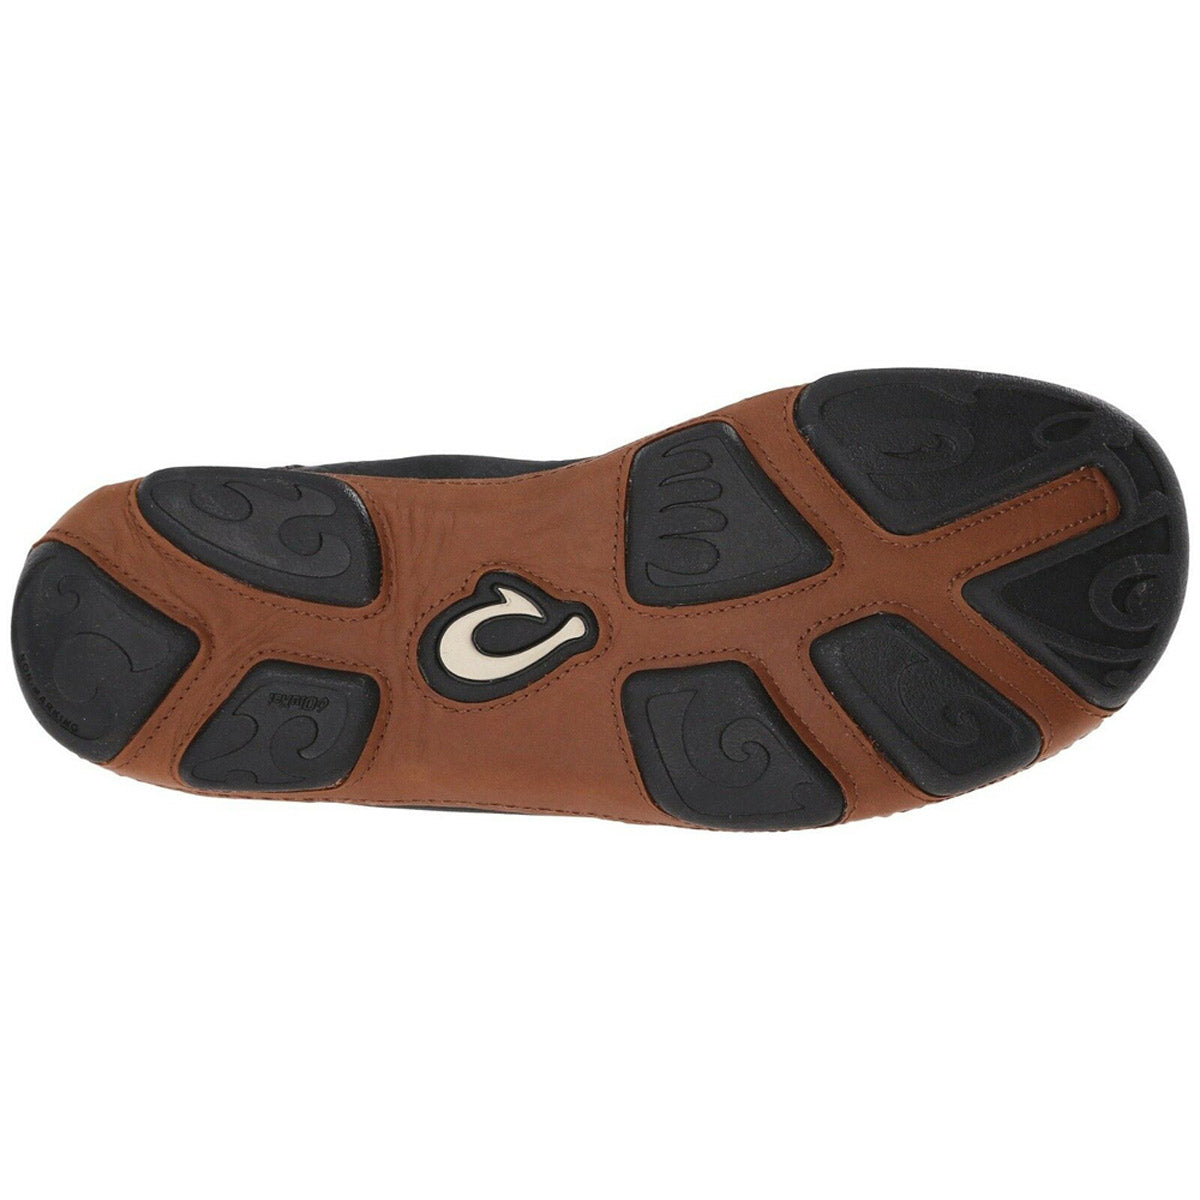 Bottom view of a brown nubuck leather Olukai Moloka Slip On Black shoe sole with black traction pads and a visible brand logo.